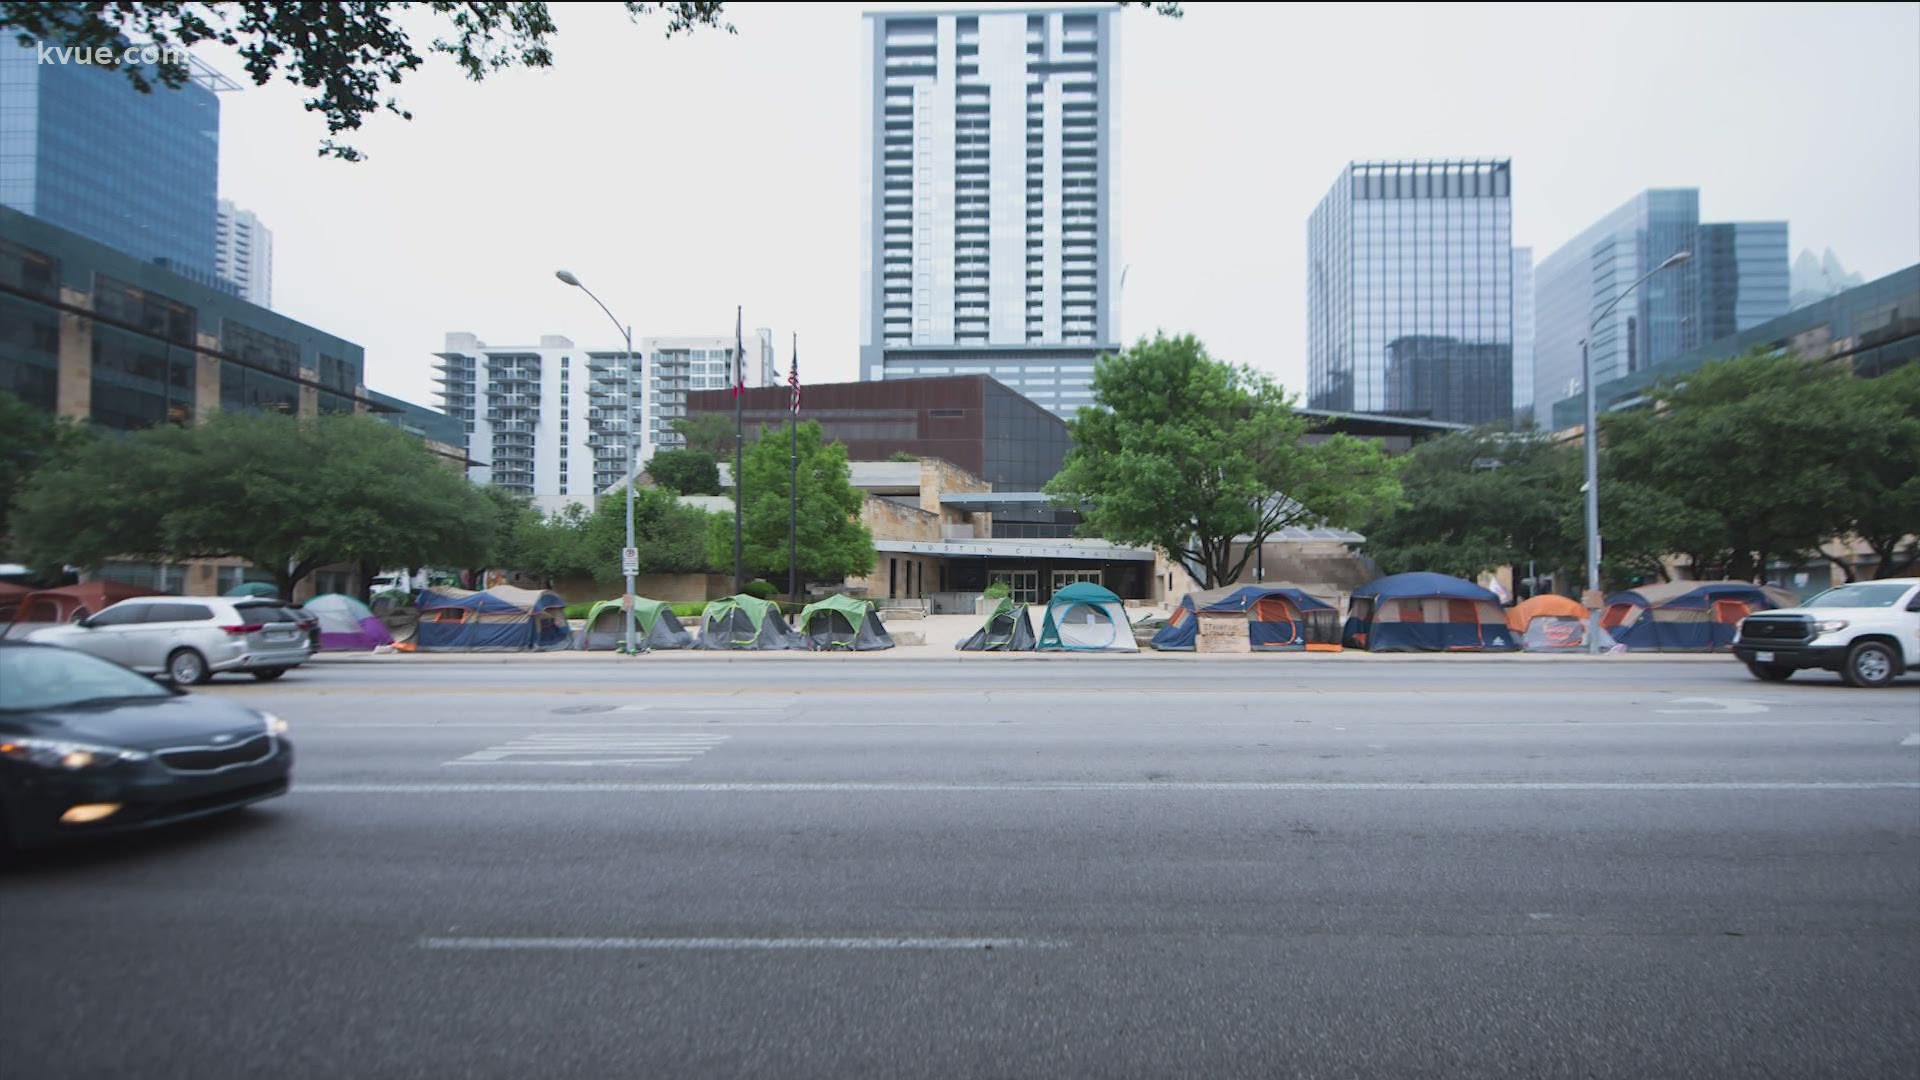 The Austin City Council on Thursday approved a series of items related to the hotel and homelessness in general.